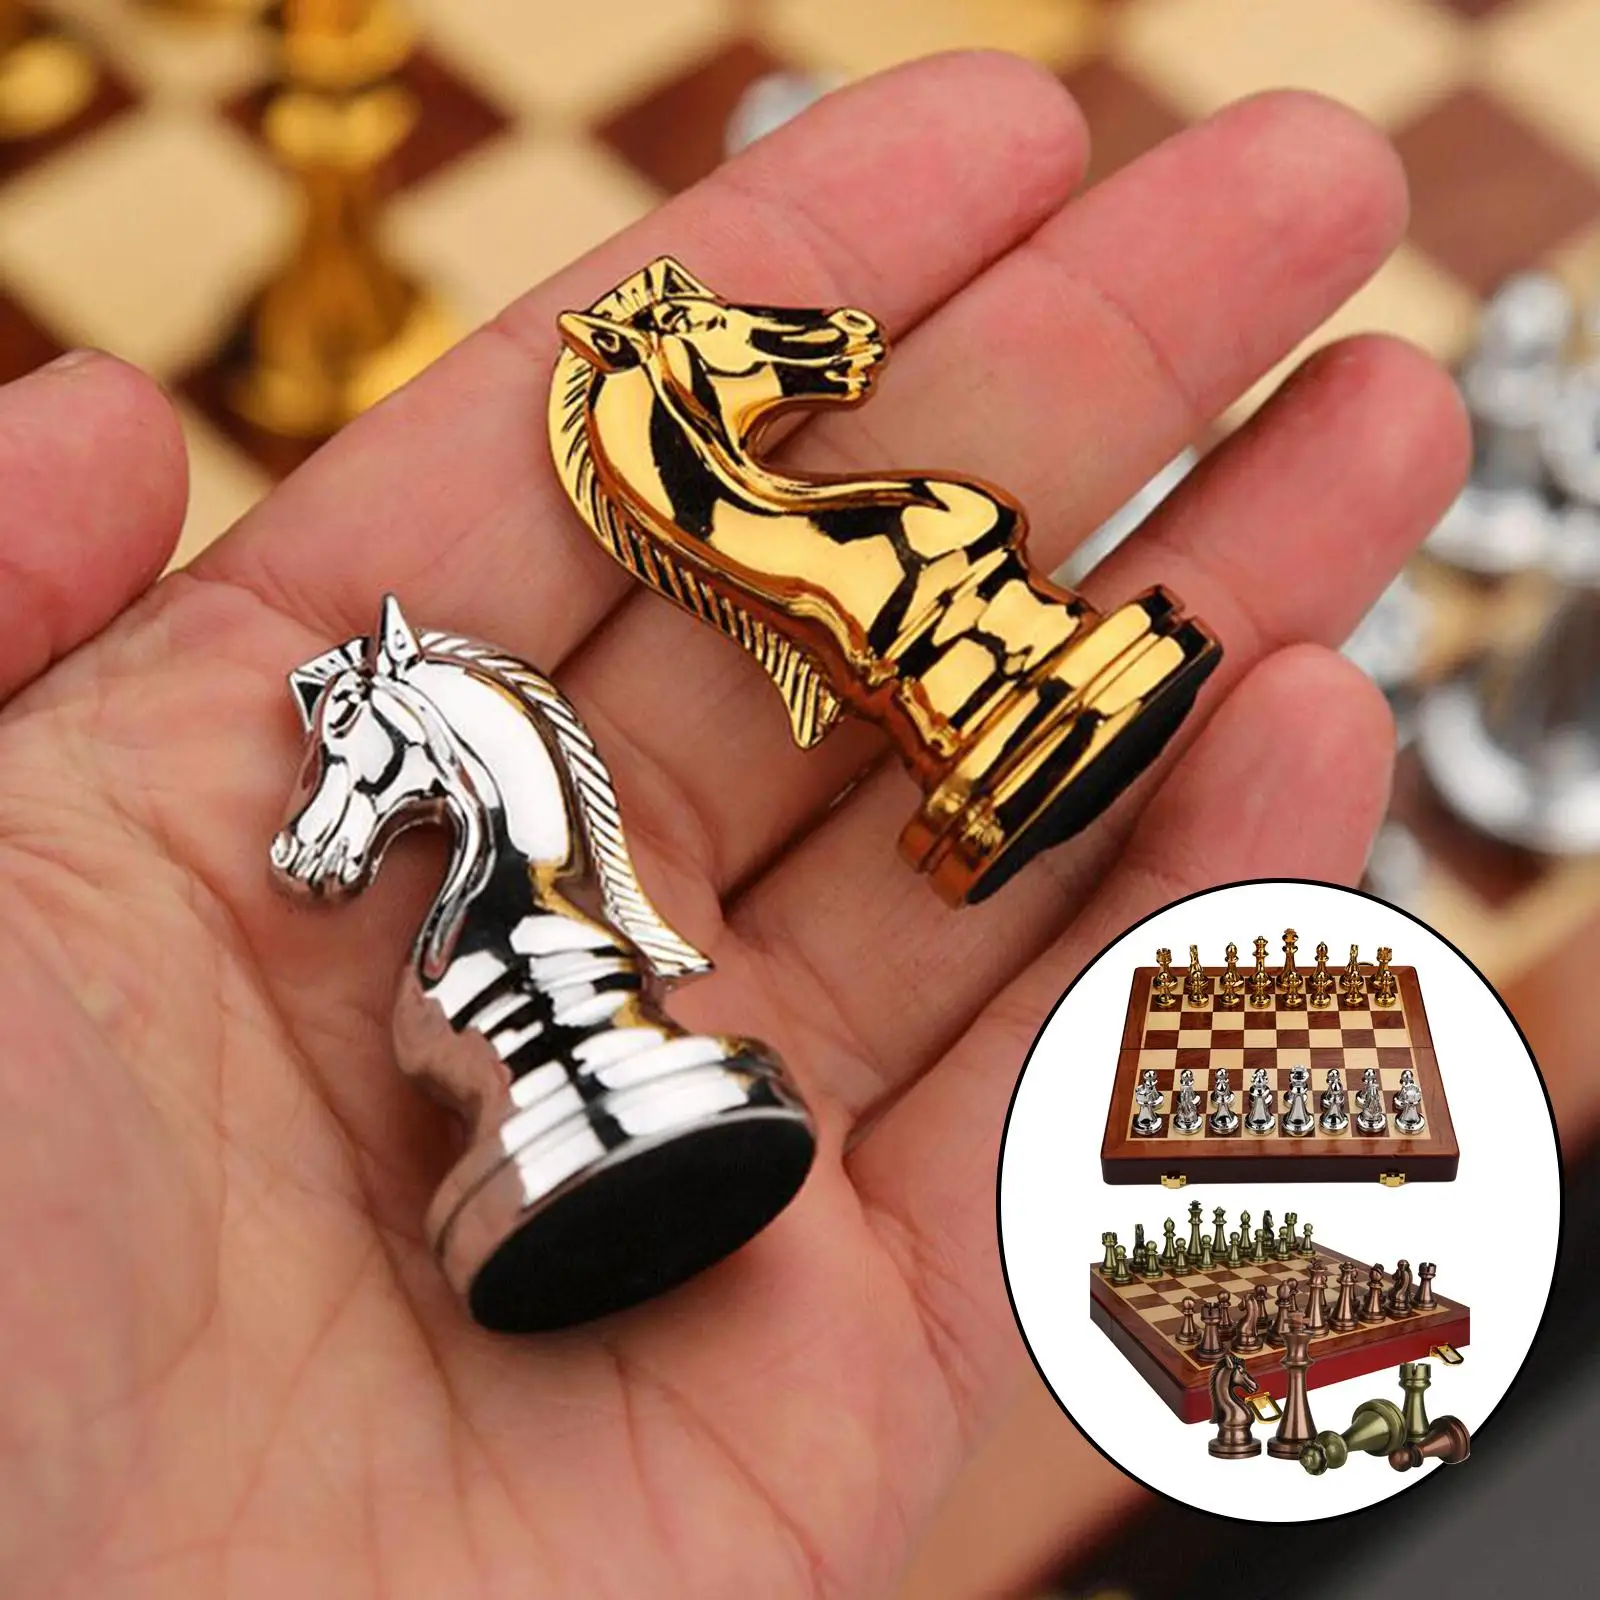 Medieval International Chess Set Premium Texture Magnetic Chess Board High-end Luxury Folding Wooden Chessboard Classic Handmade